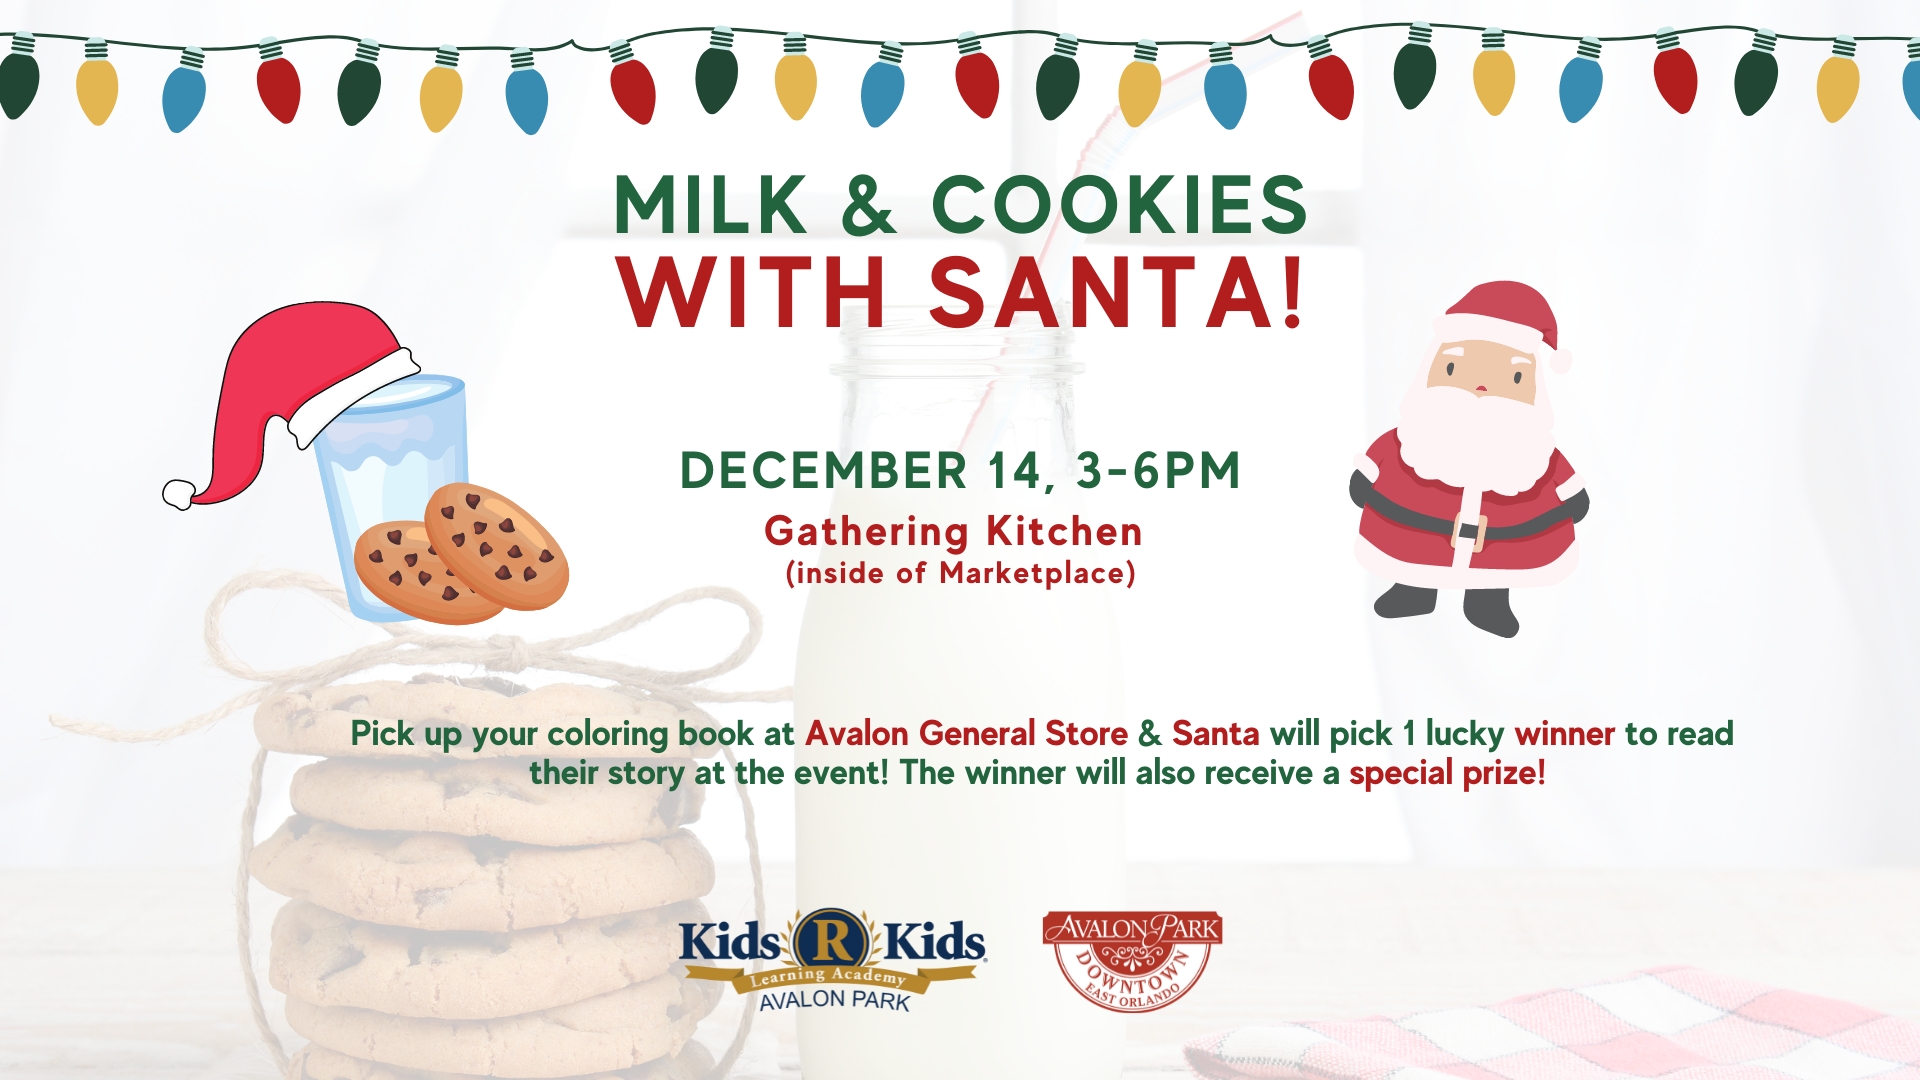 Milk & Cookies with Santa cover image